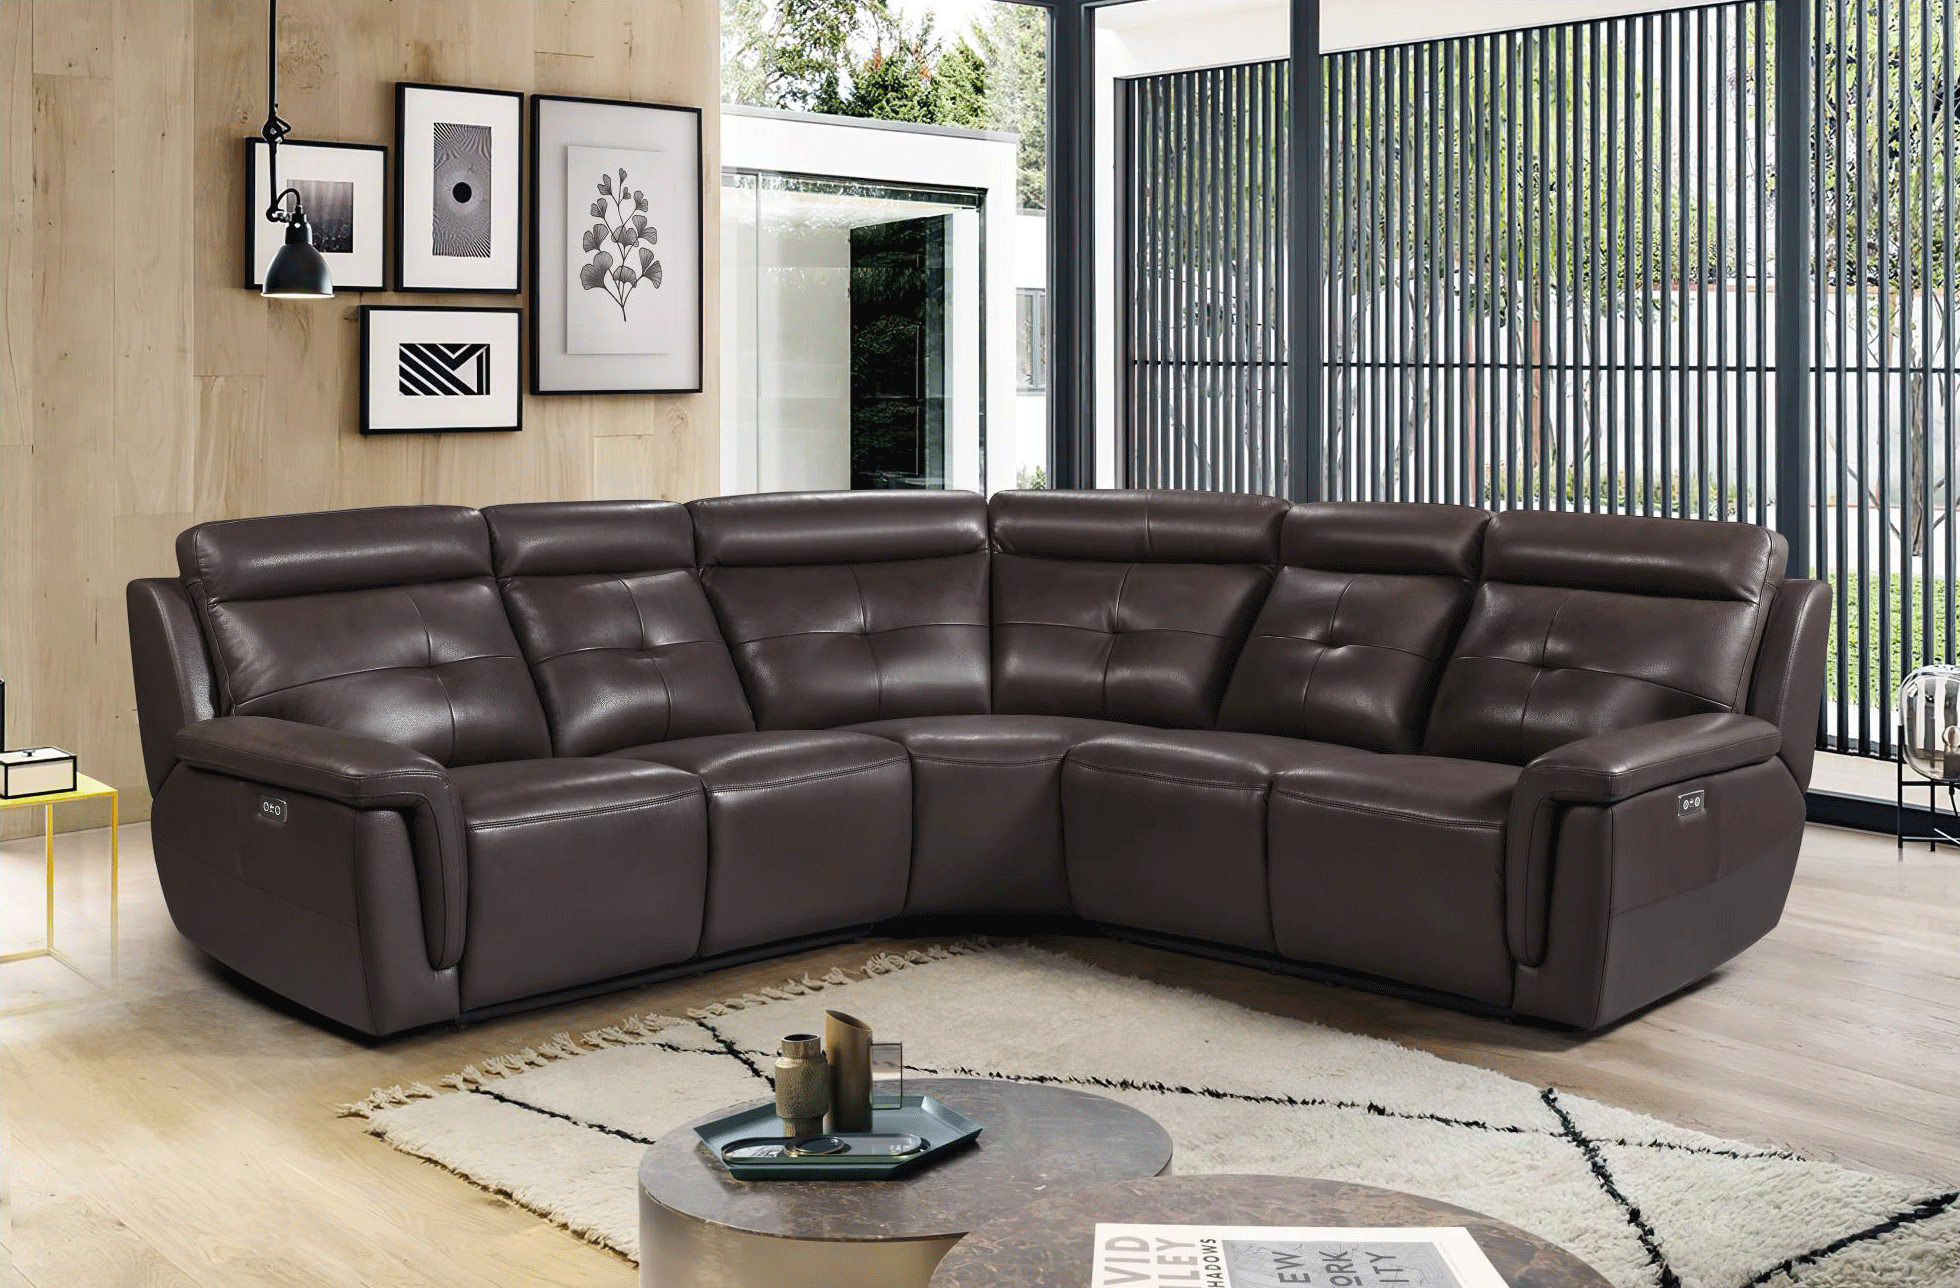 Brands RXN Classic Living Special Order 2937 Sectional w/ electric recliners